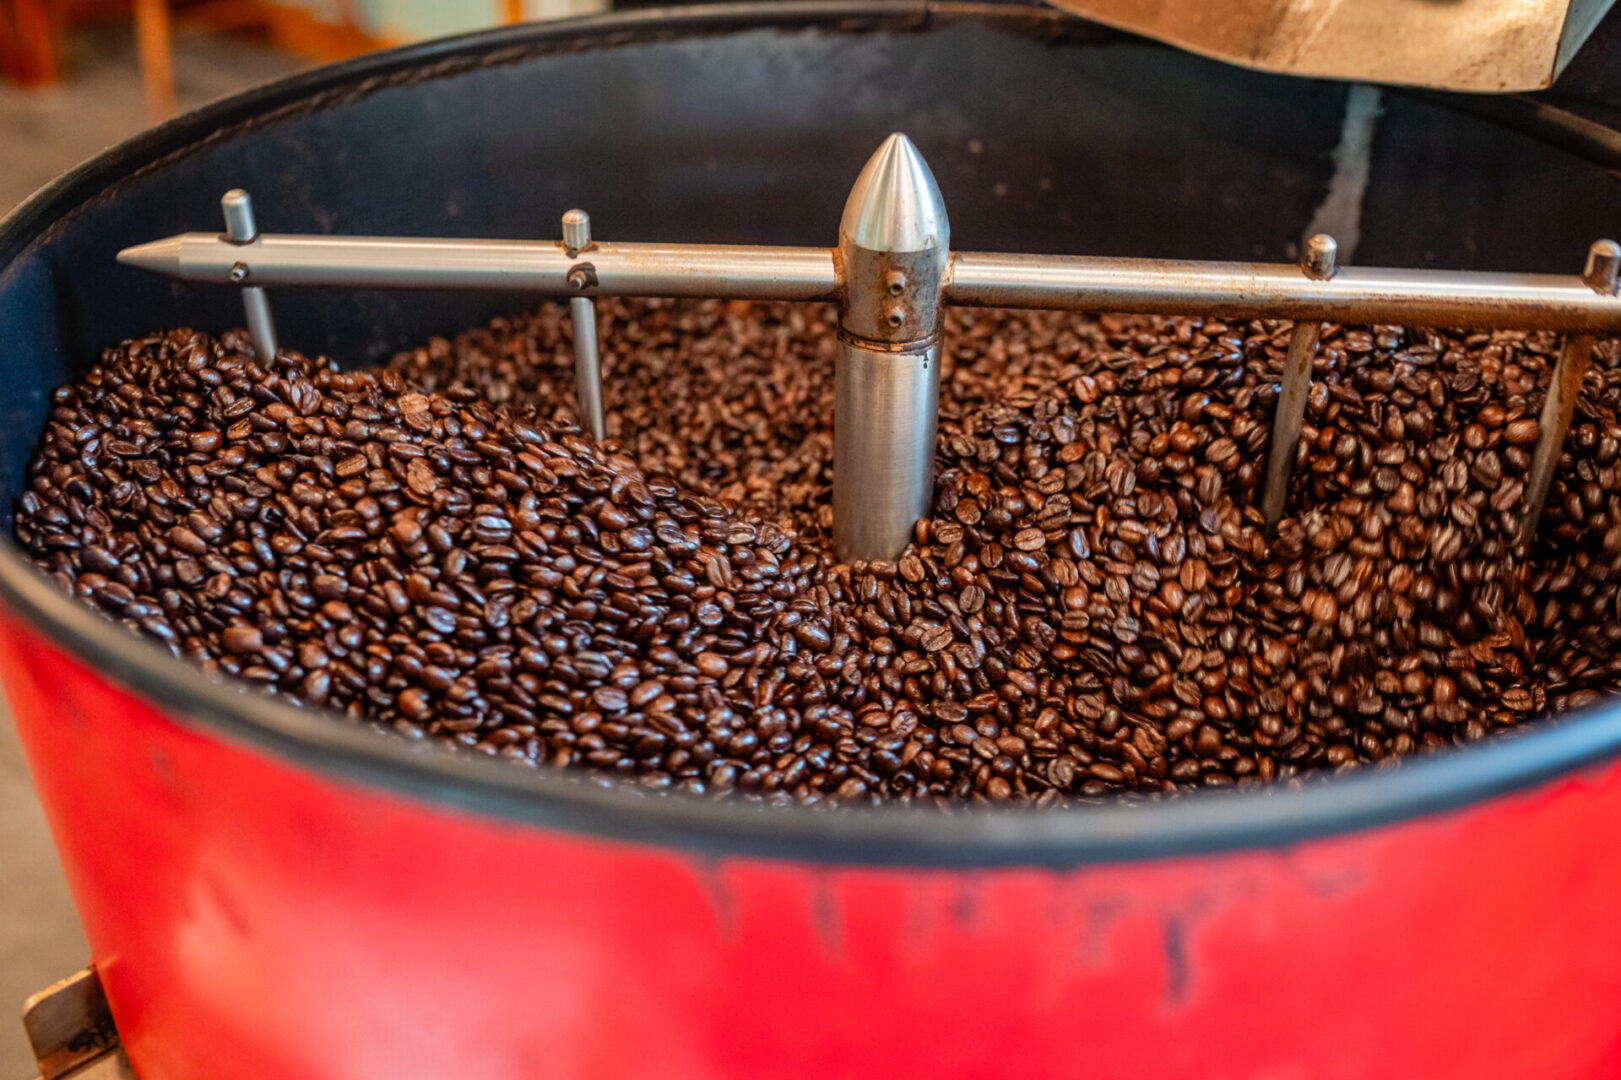 A red barrel filled with coffee beans.